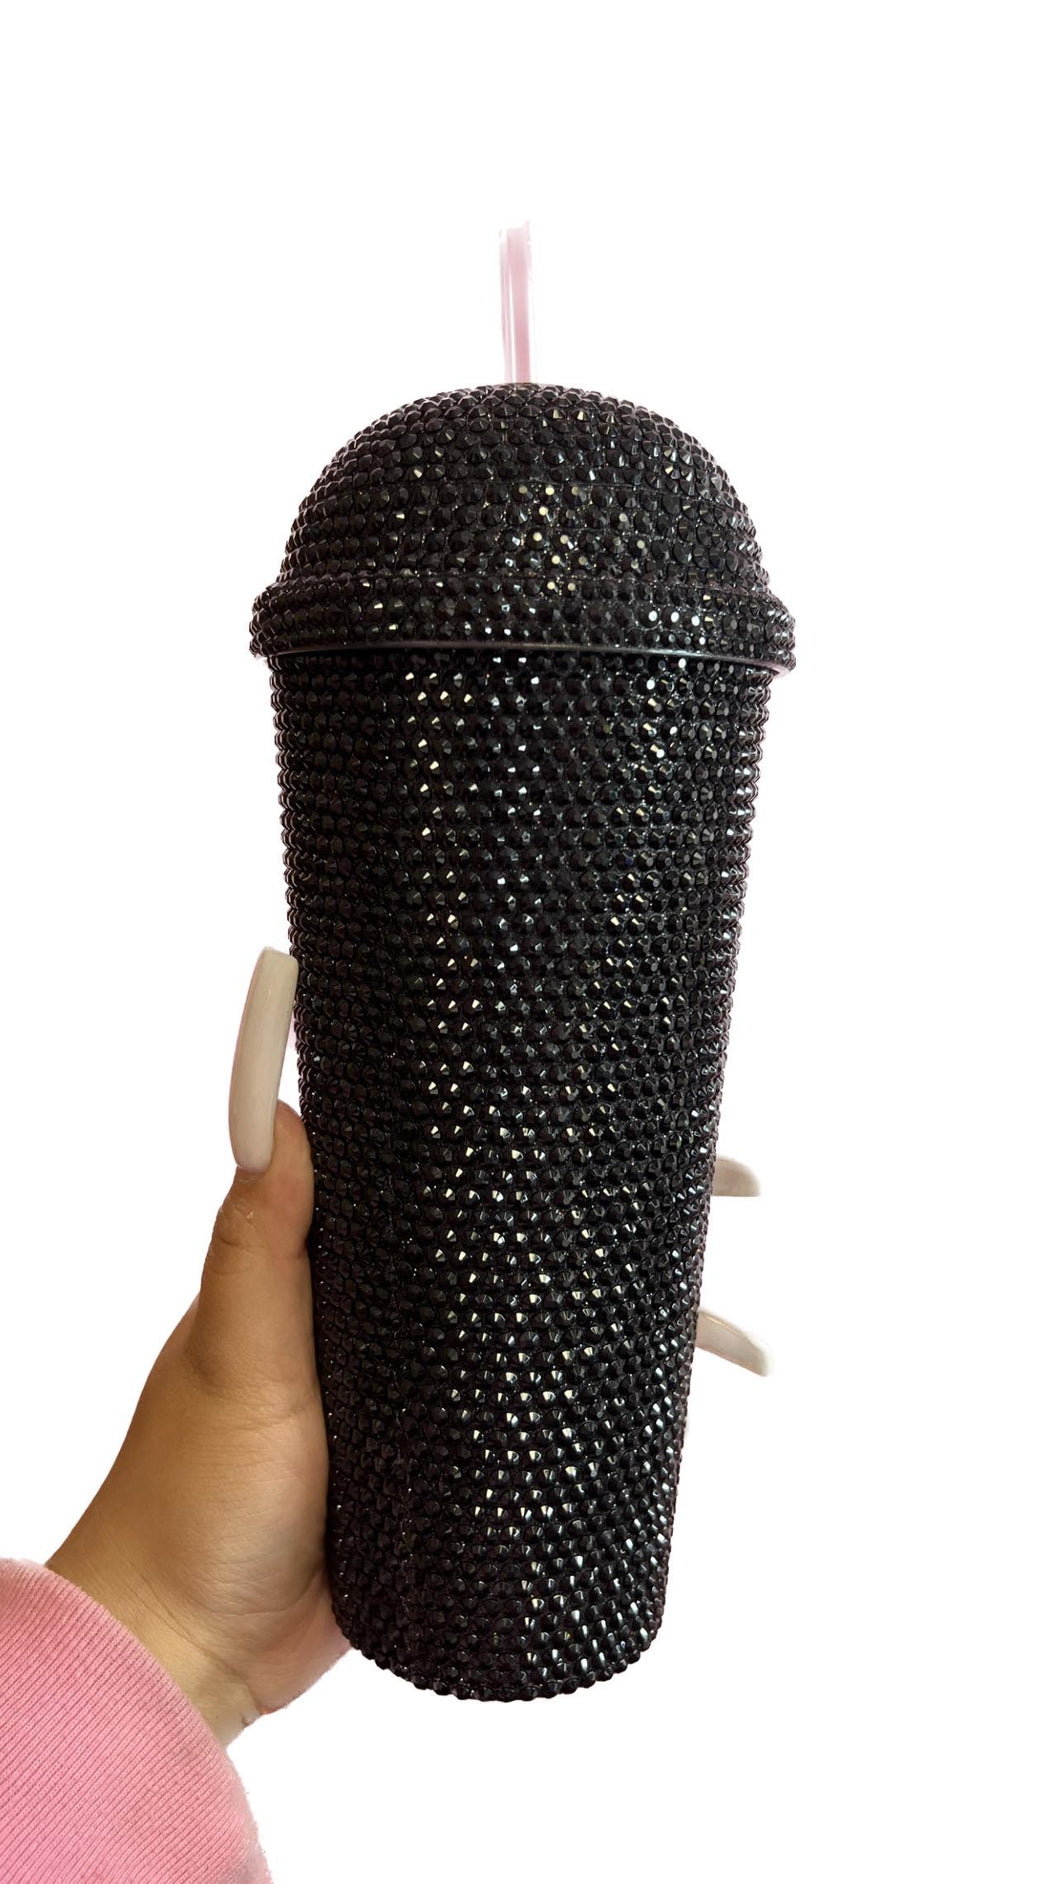 Black Bling Cup